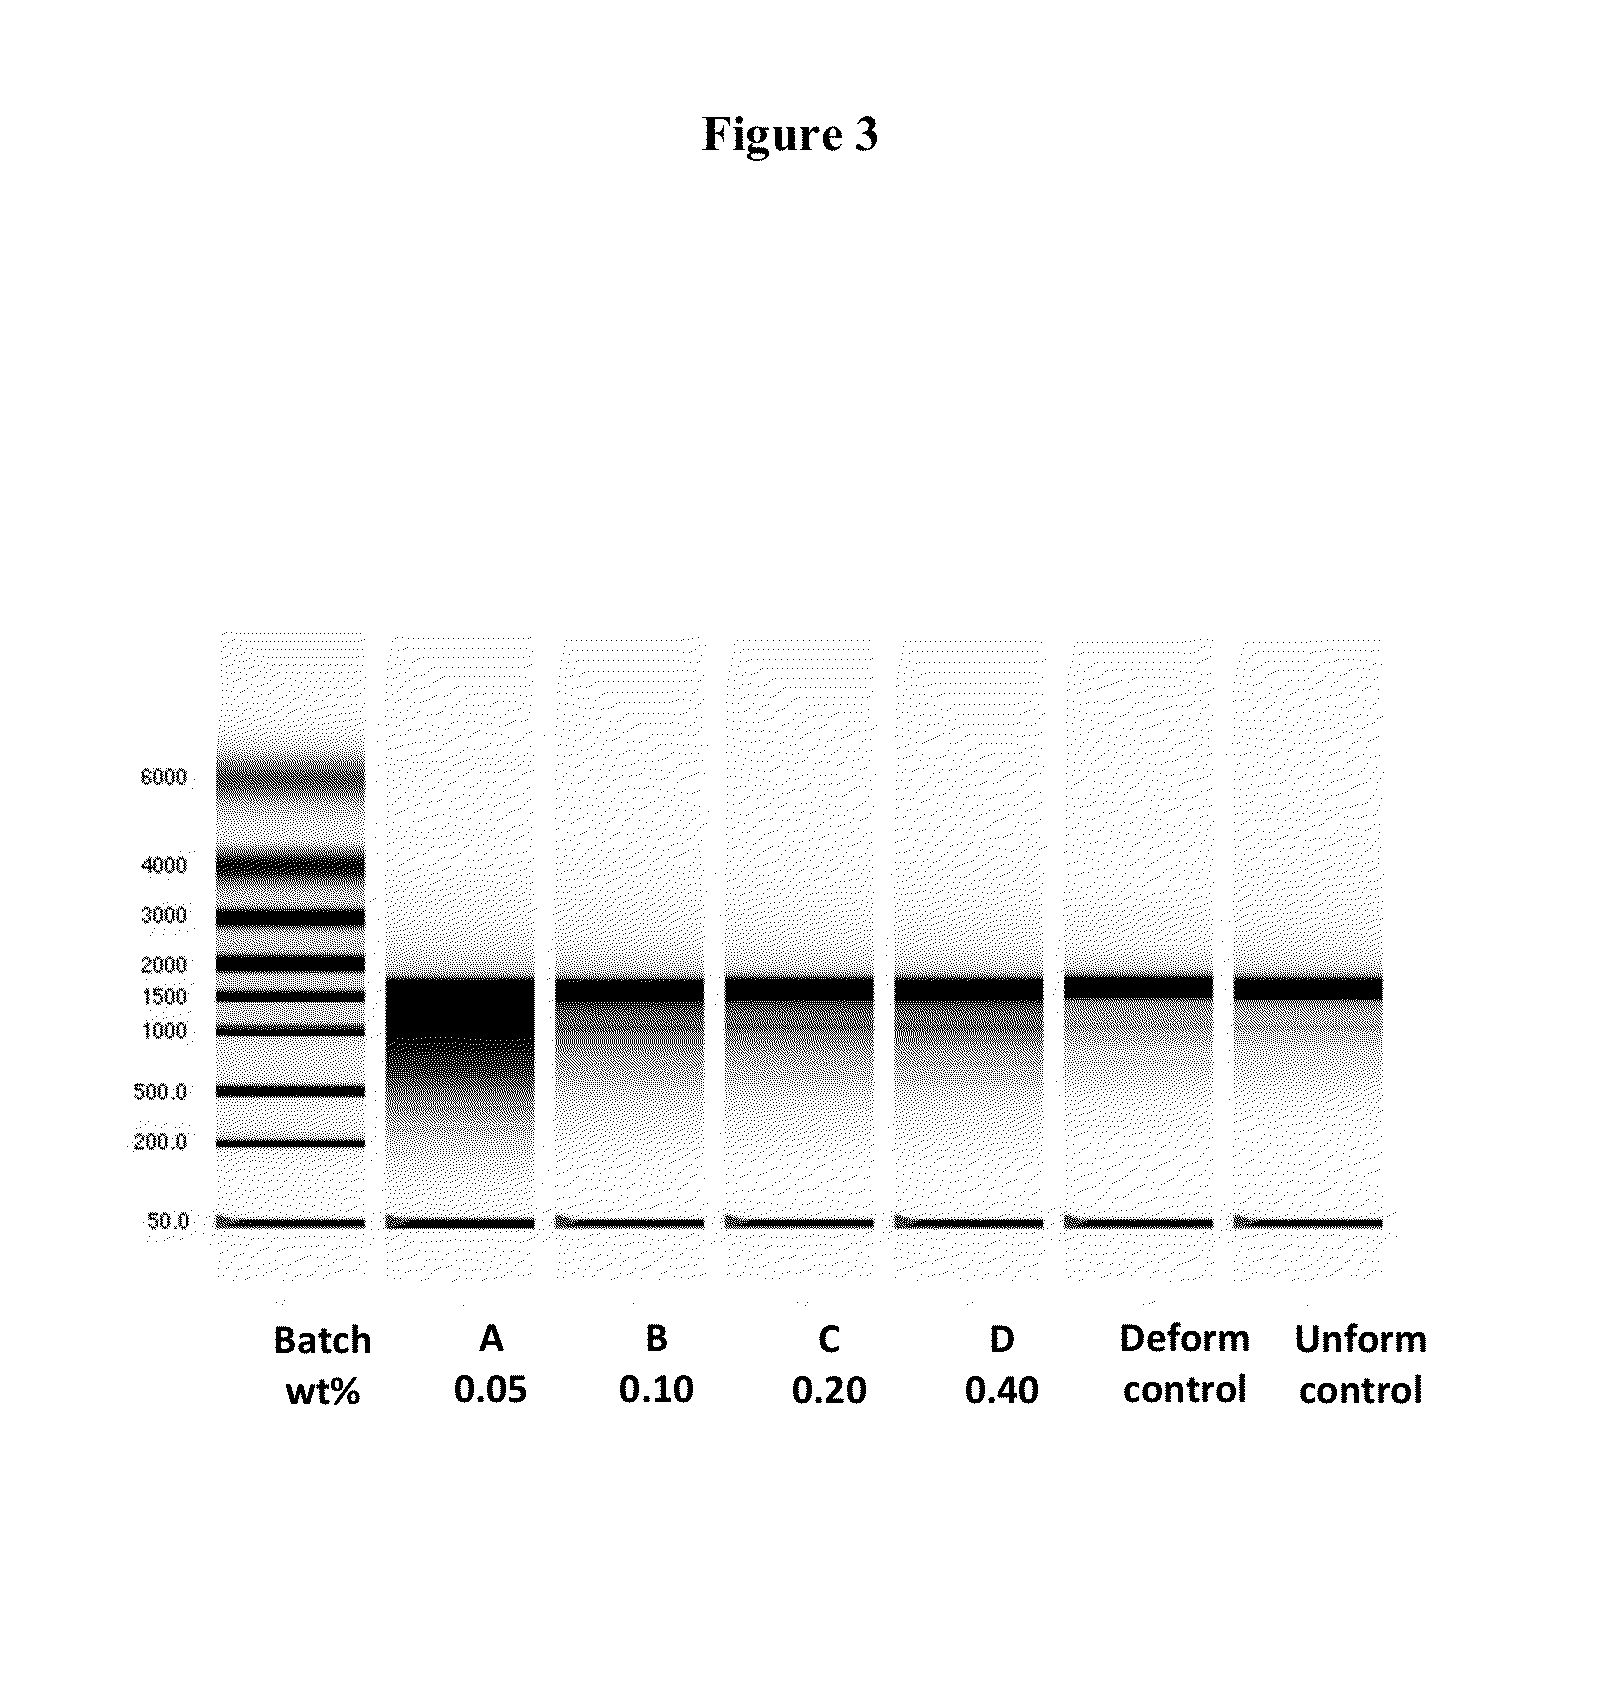 Modified nucleoside, nucleotide, and nucleic acid compositions